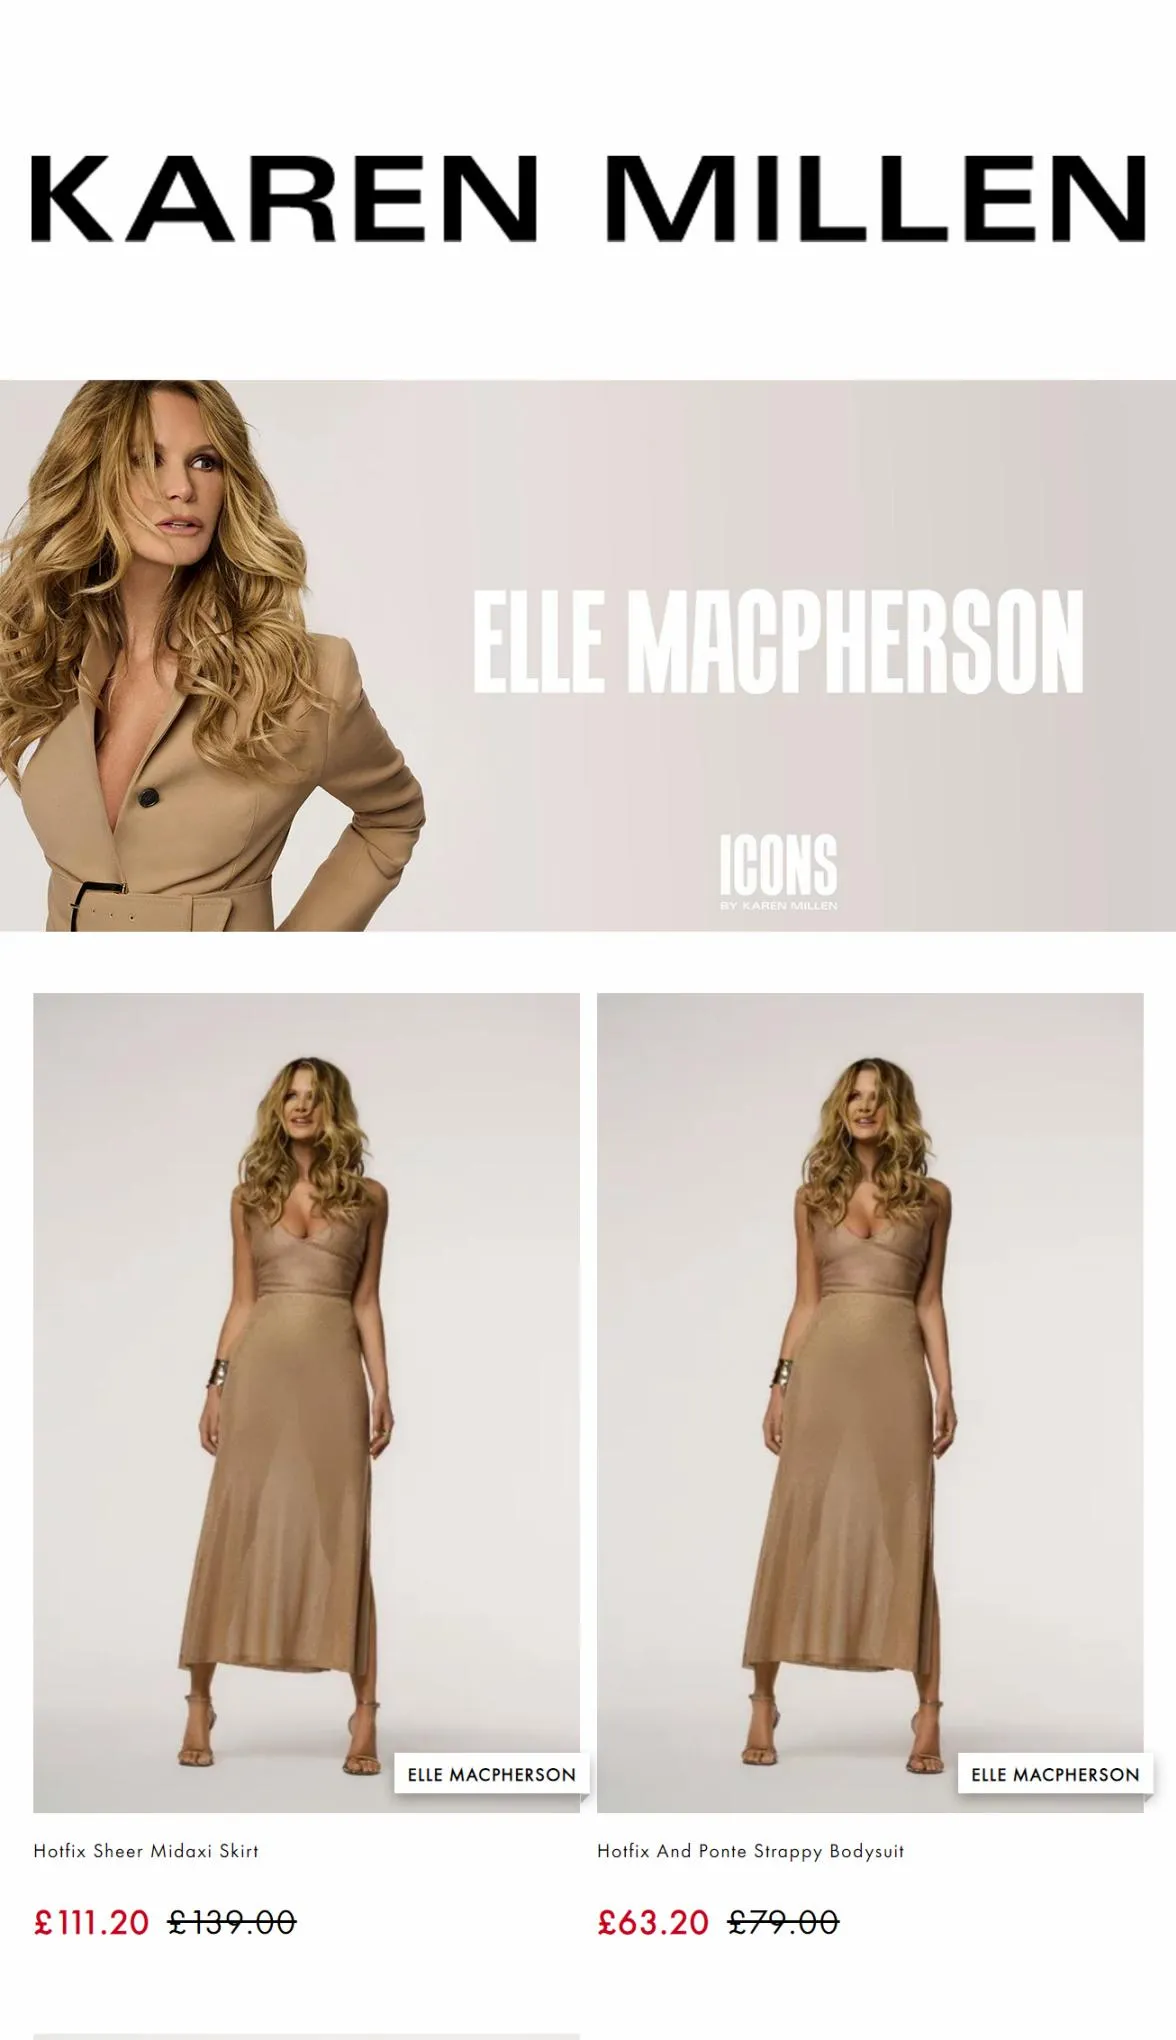 Catalogue THE ICONS  ELLE MACPHERSON, page 00001